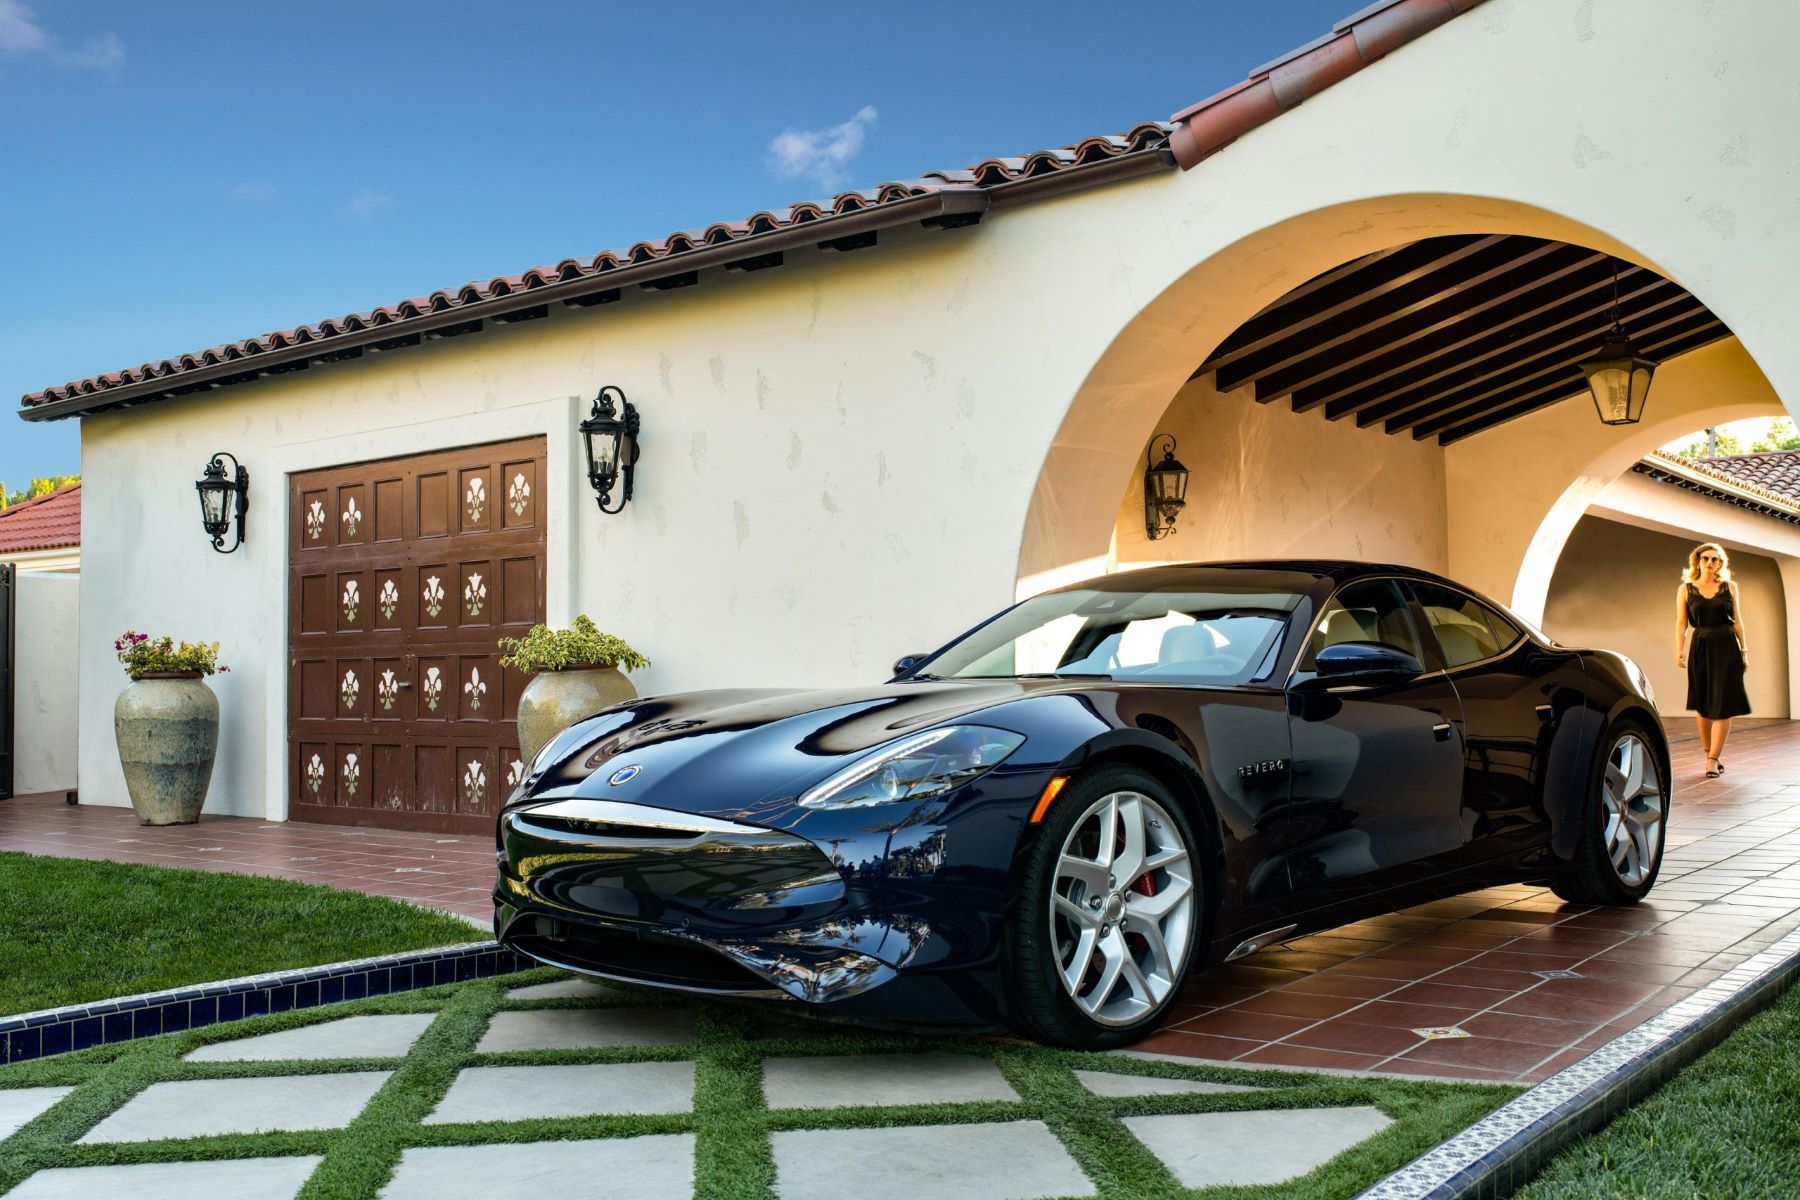 A black Karma Revero GT plug-in hybrid electric vehicle (PHEV) parked on the brick driveway of a luxury home